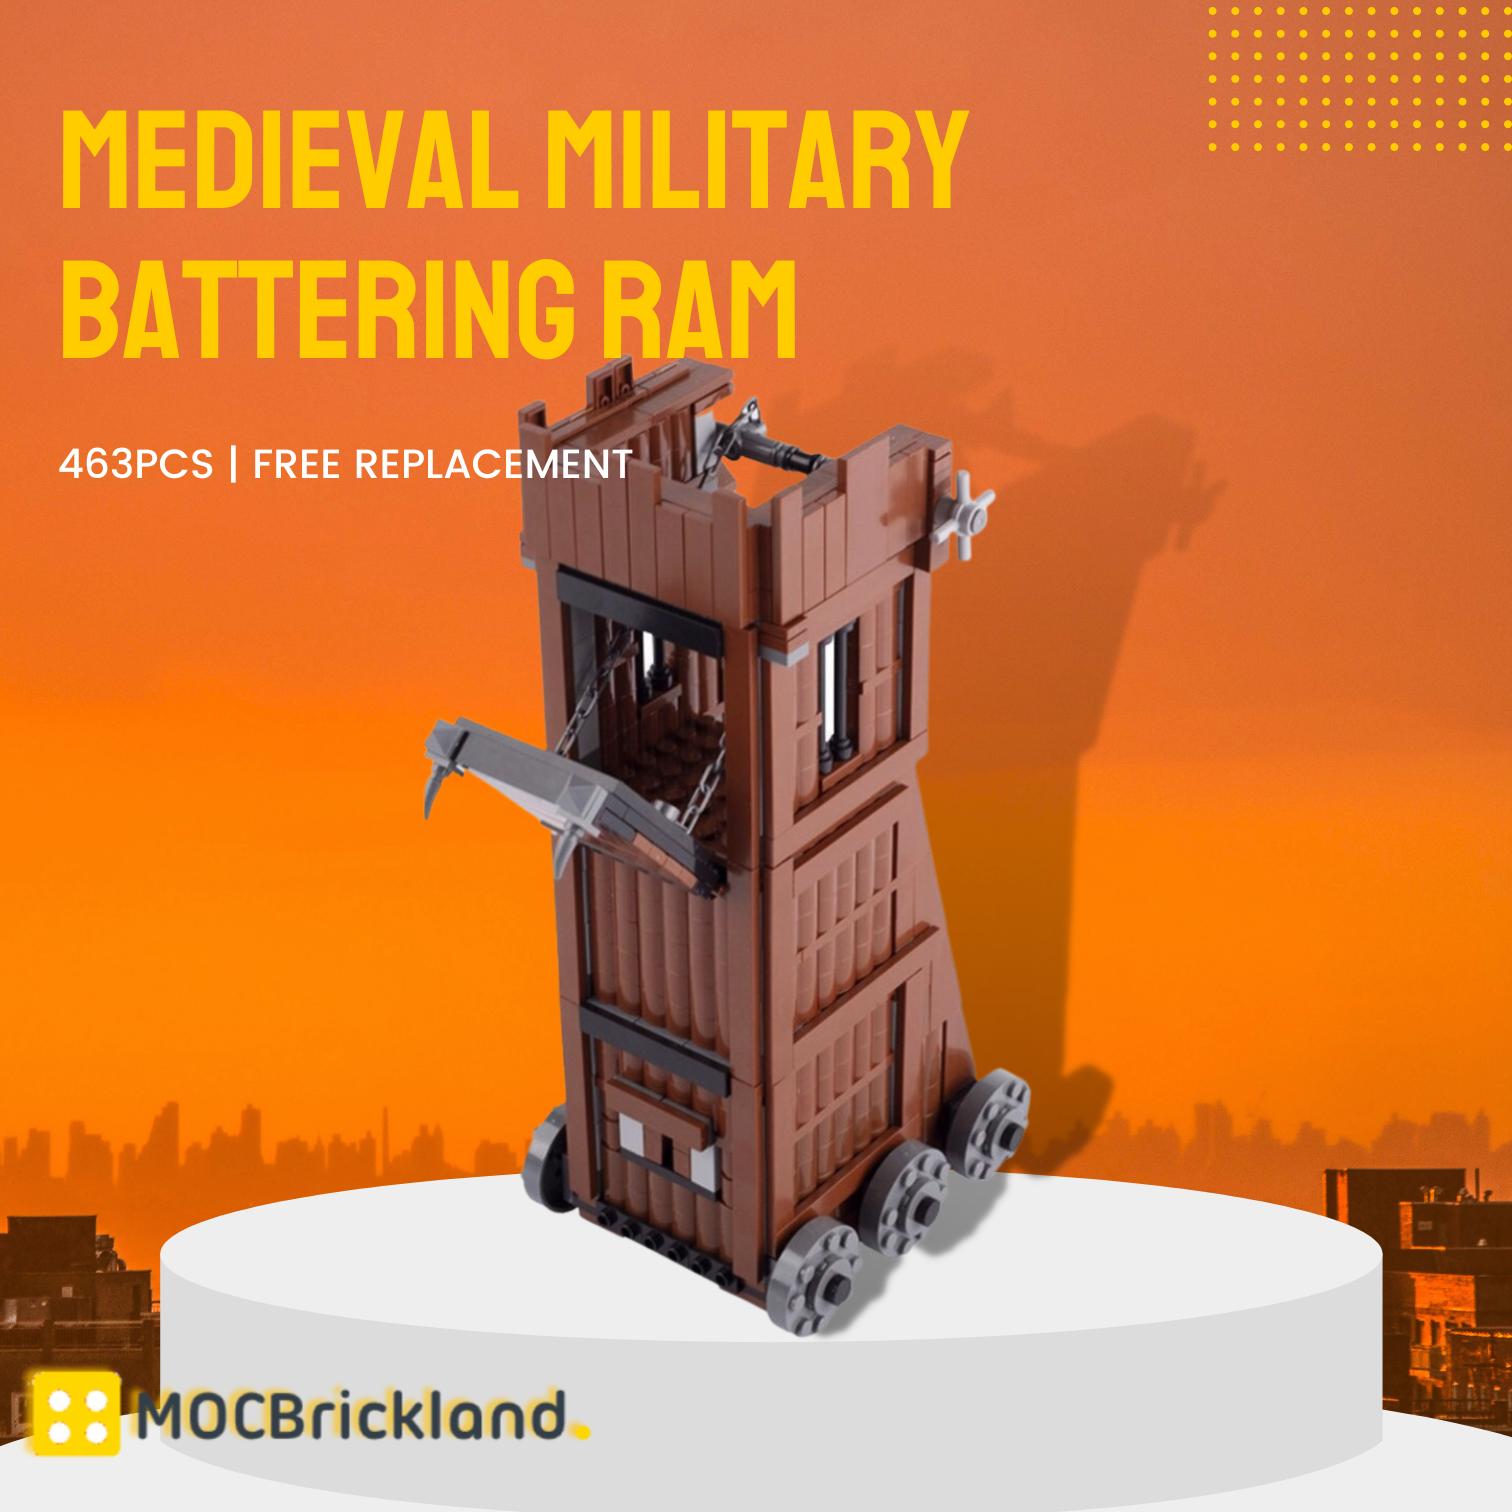 Medieval Military Battering Ram MOC-89533 Creator With 463PCS